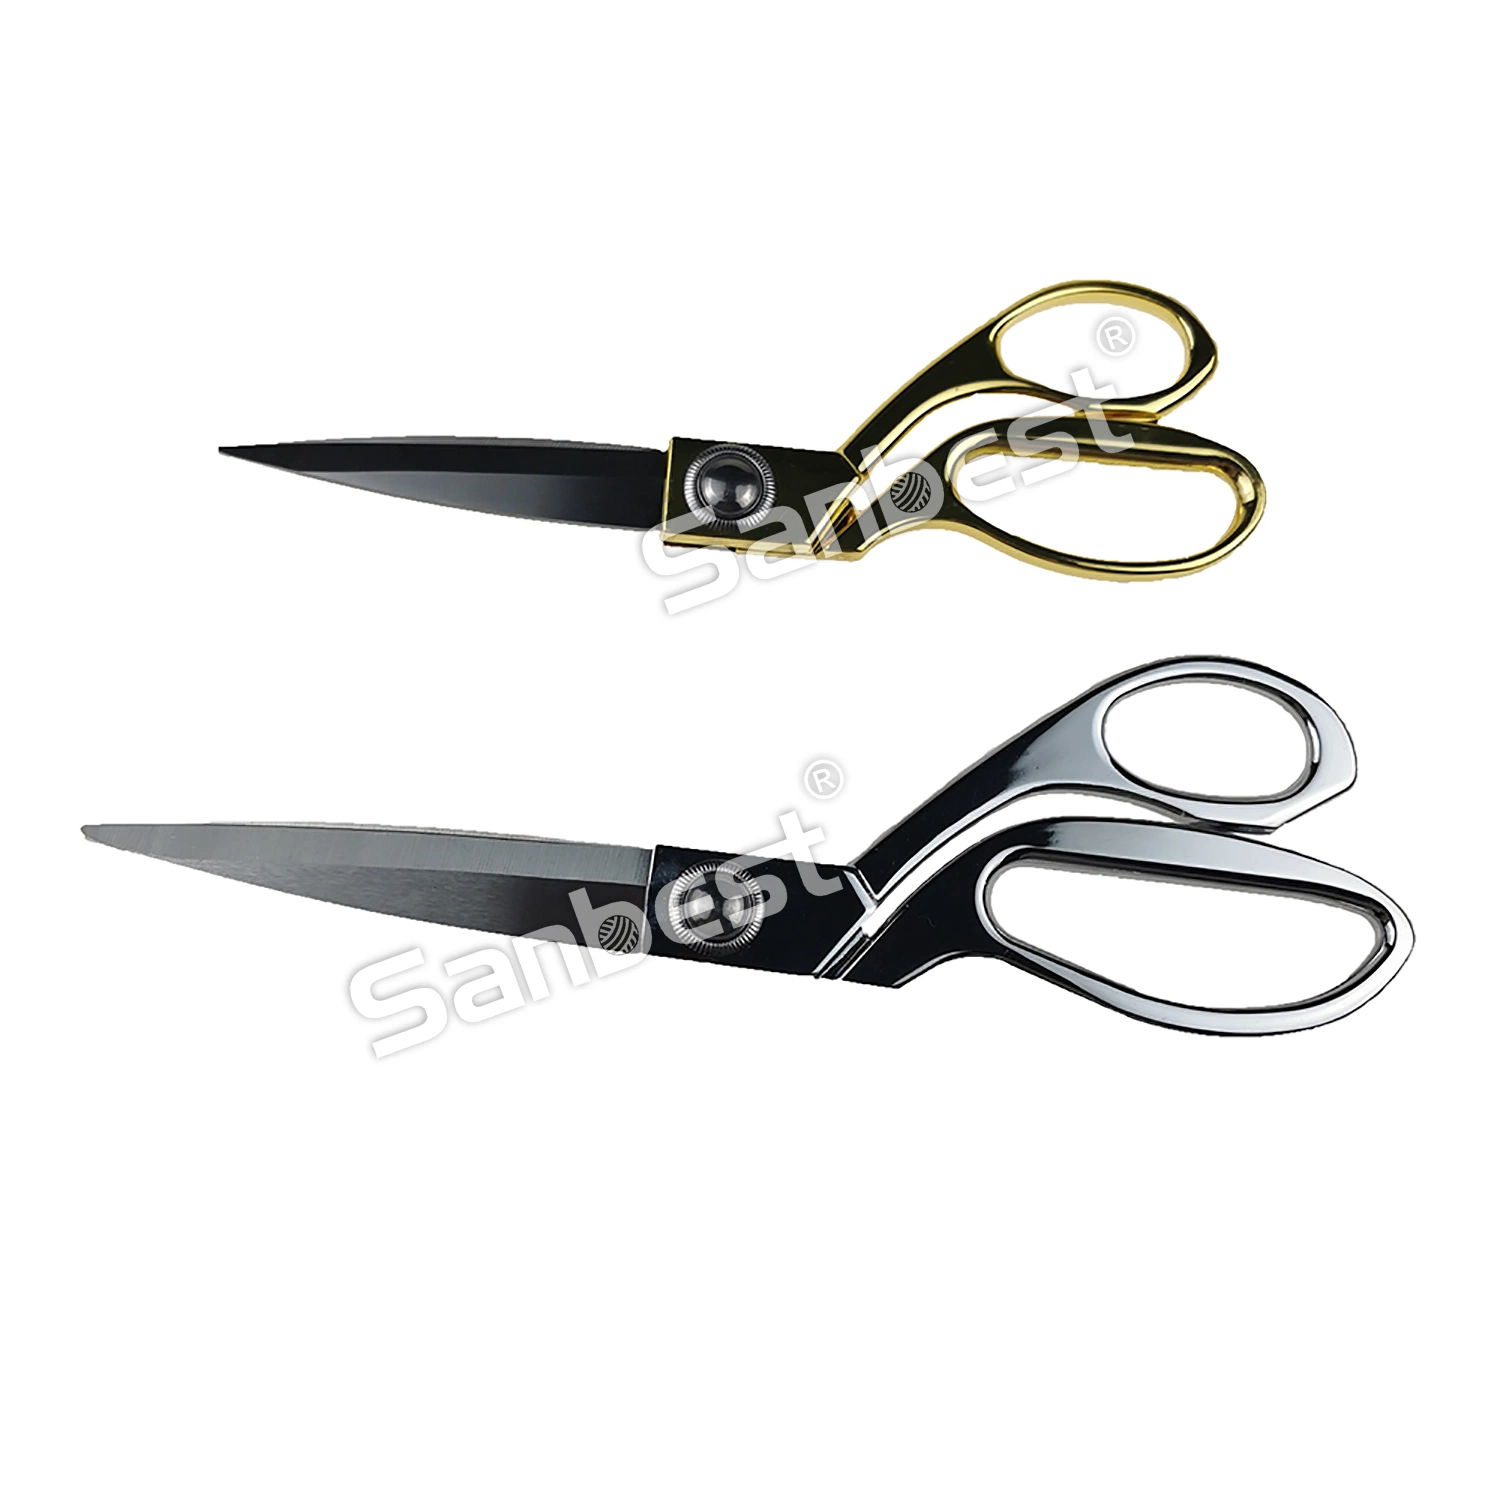 Stainless Steel Tailor Scissors Household Sewing Scissors